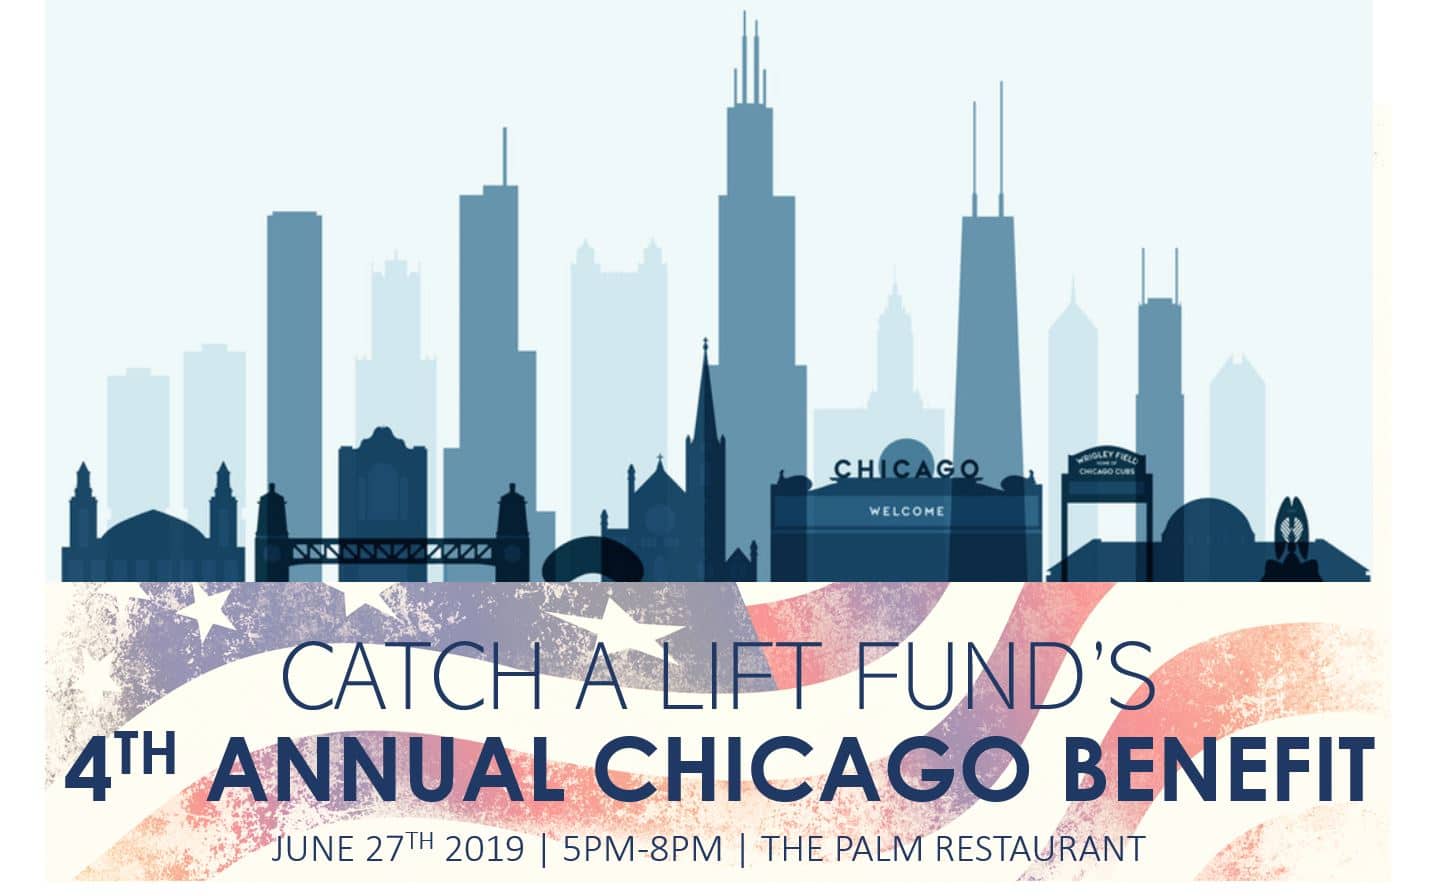 4th Annual Chicago Benefit Catch a Lift